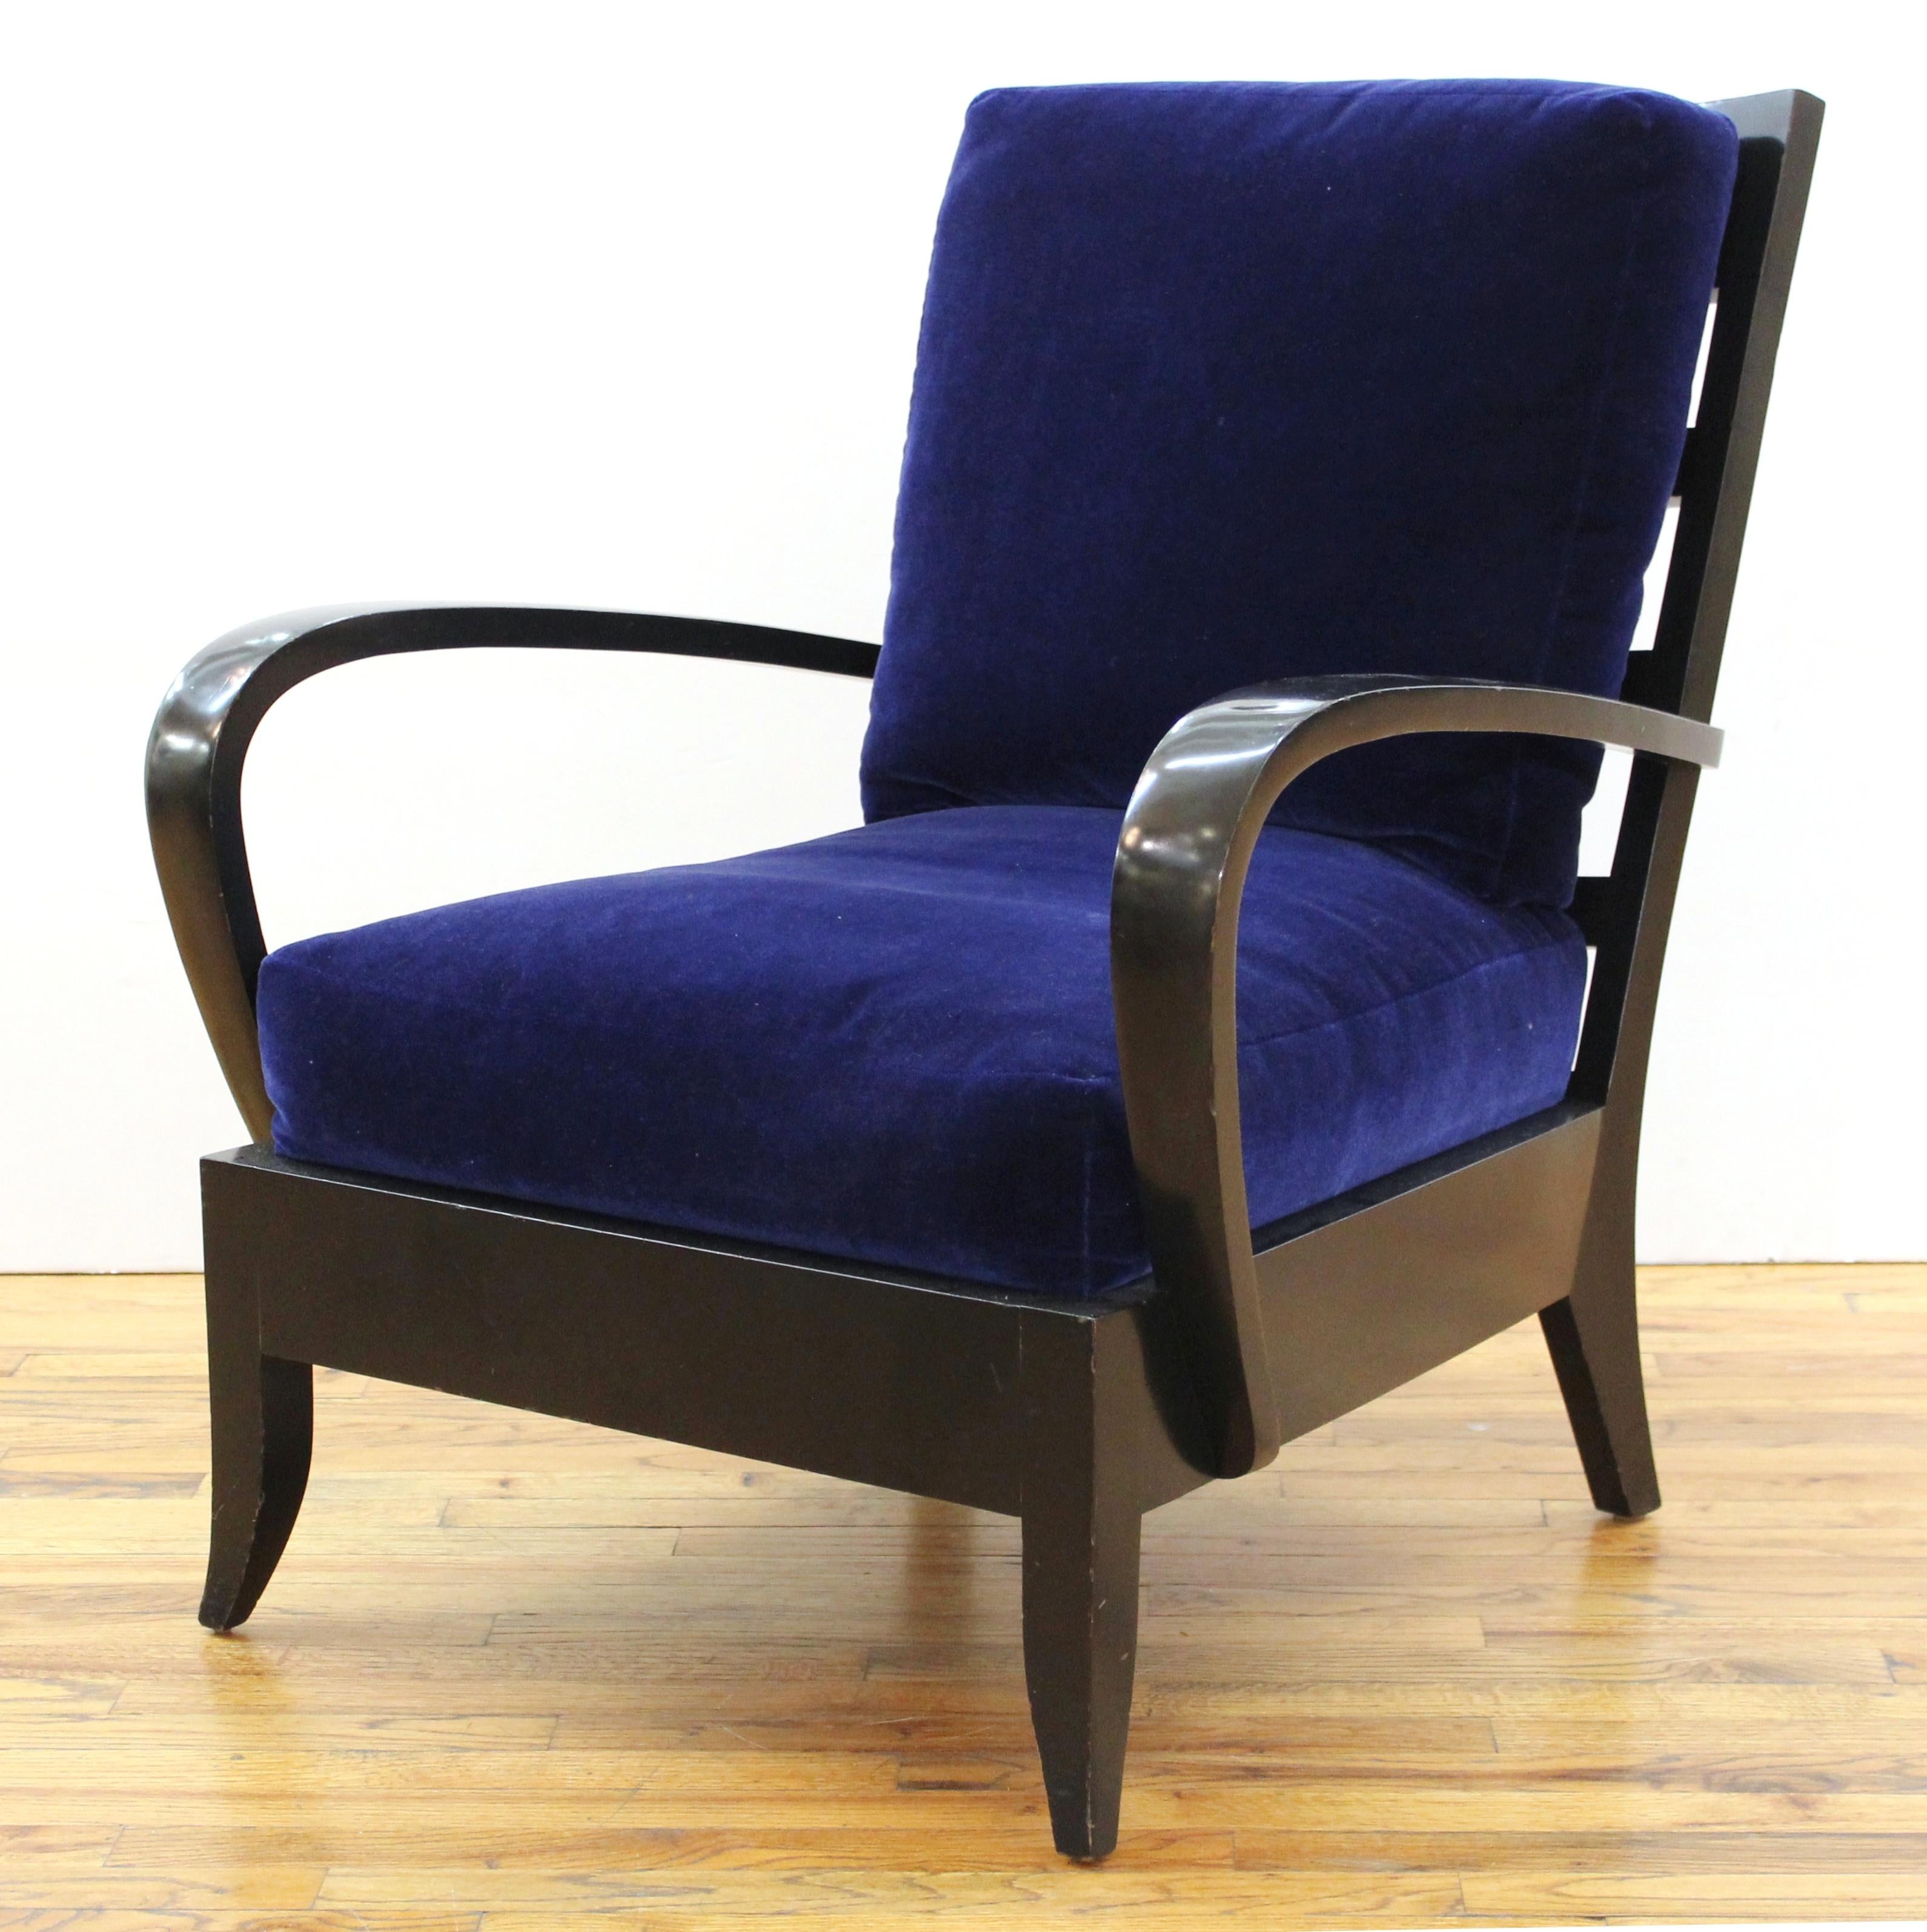 Dakota Jackson for Holly Hunt pair of modern 'Ceylon' lounge chairs with steam-bent arm rests and ladder backs and dark blue mohair upholstery. Age-appropriate wear to the wood.